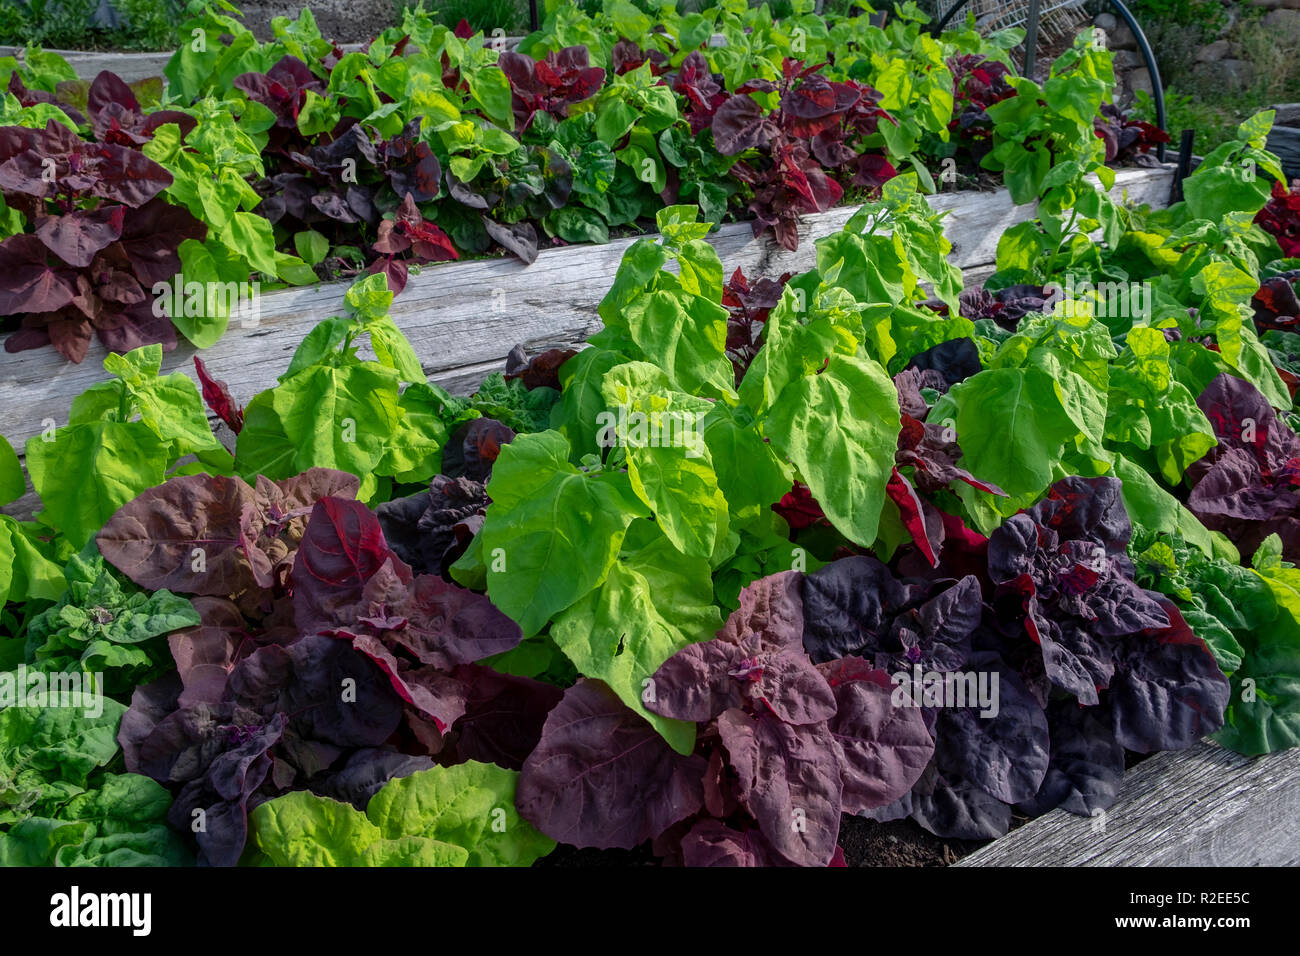 Green and red orach, atripex hortensis, a variety of saltbush related to spinach provide a contrasting colur splash in the vegetable garden. Stock Photo